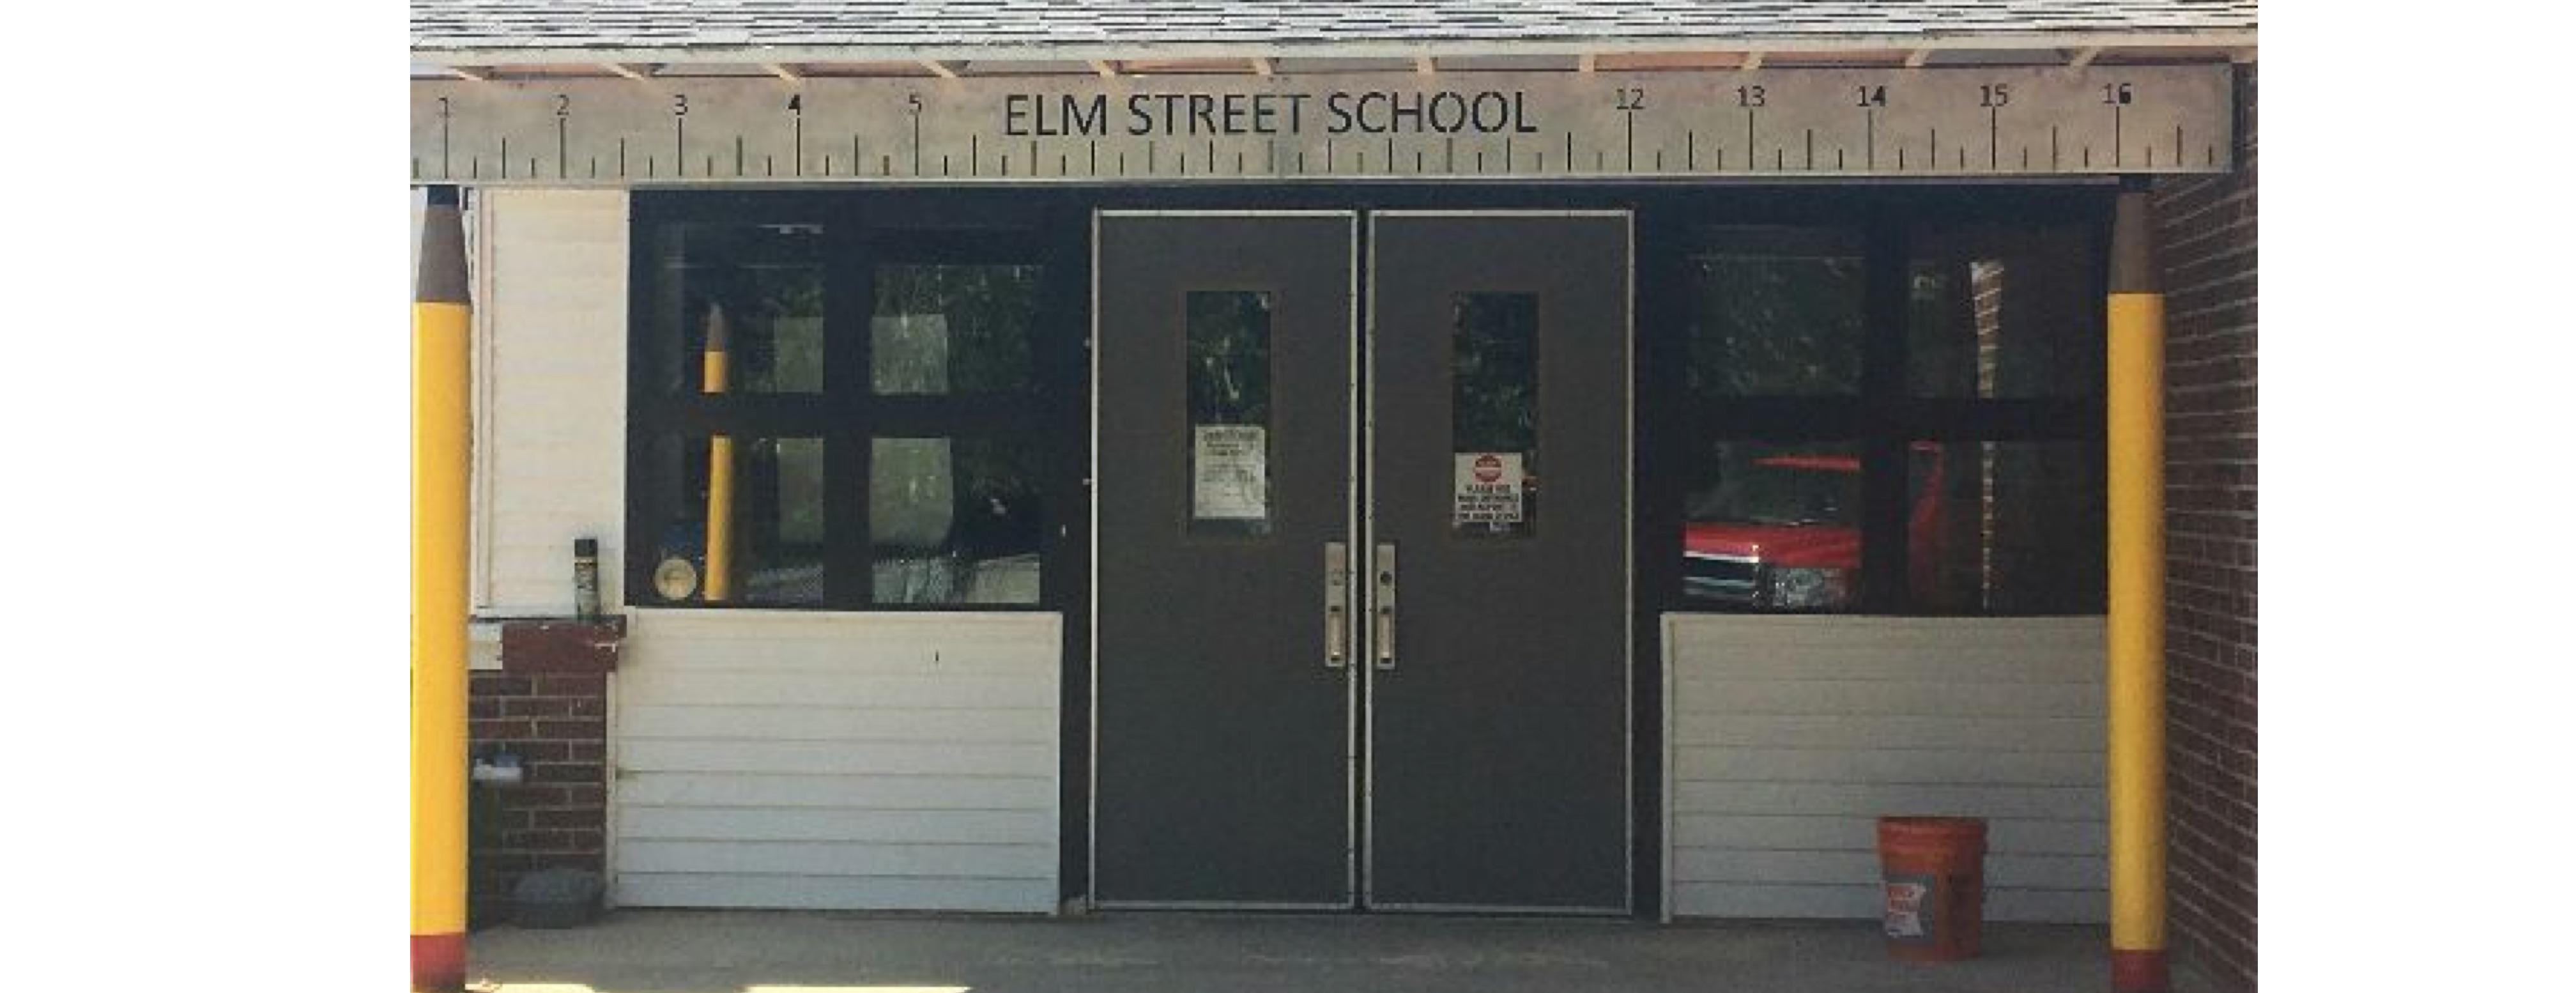 Photo of the pencils and ruler used in decor at the front of Elm Street School. Very cool!